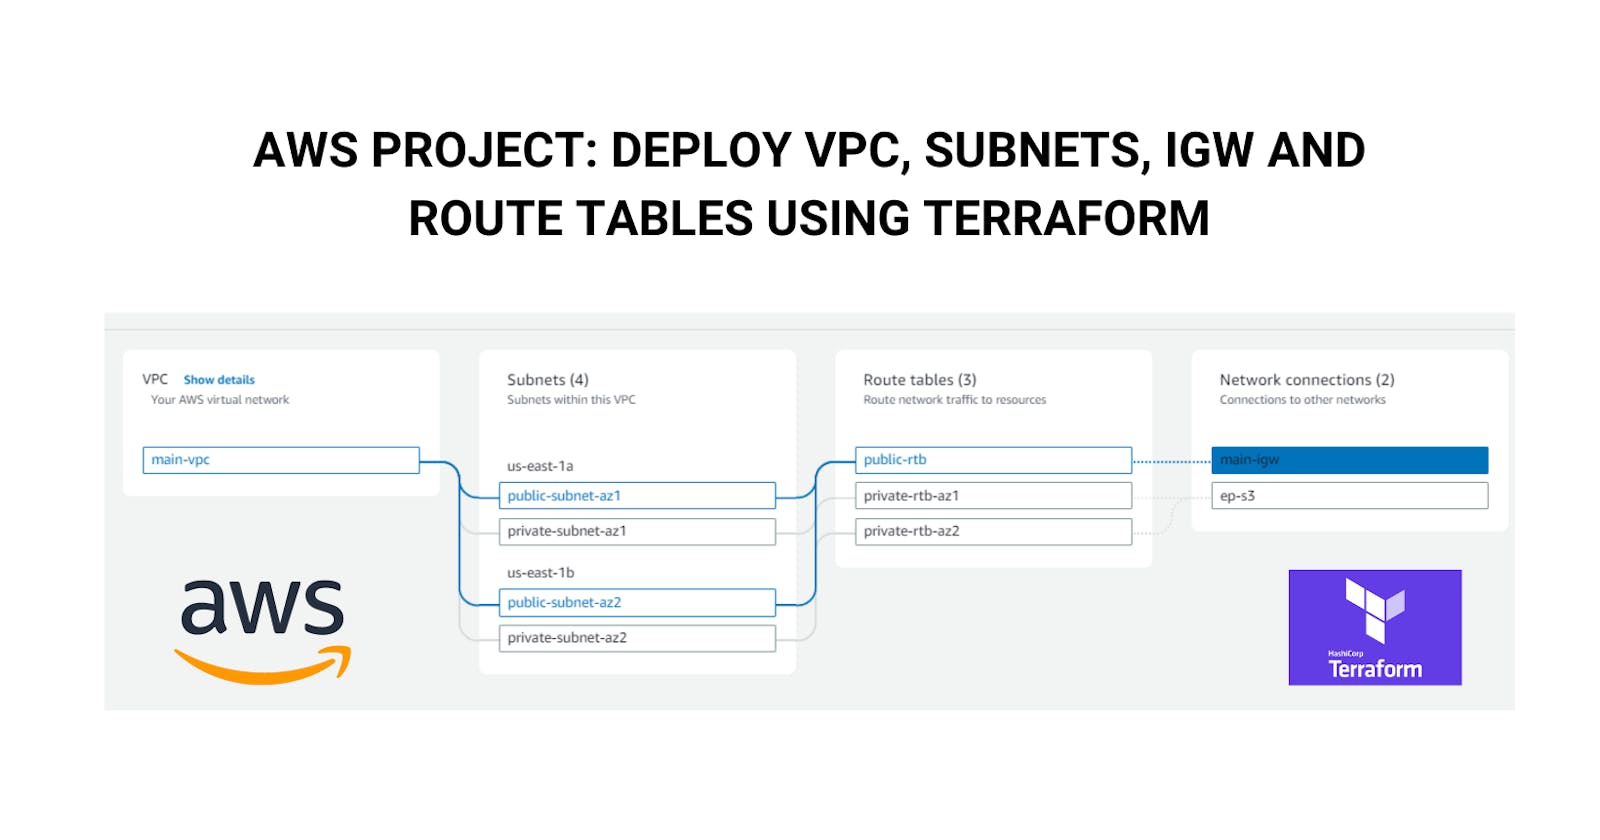 AWS Project: Deploy VPC, Subnets, IGW and Route Tables using Terraform